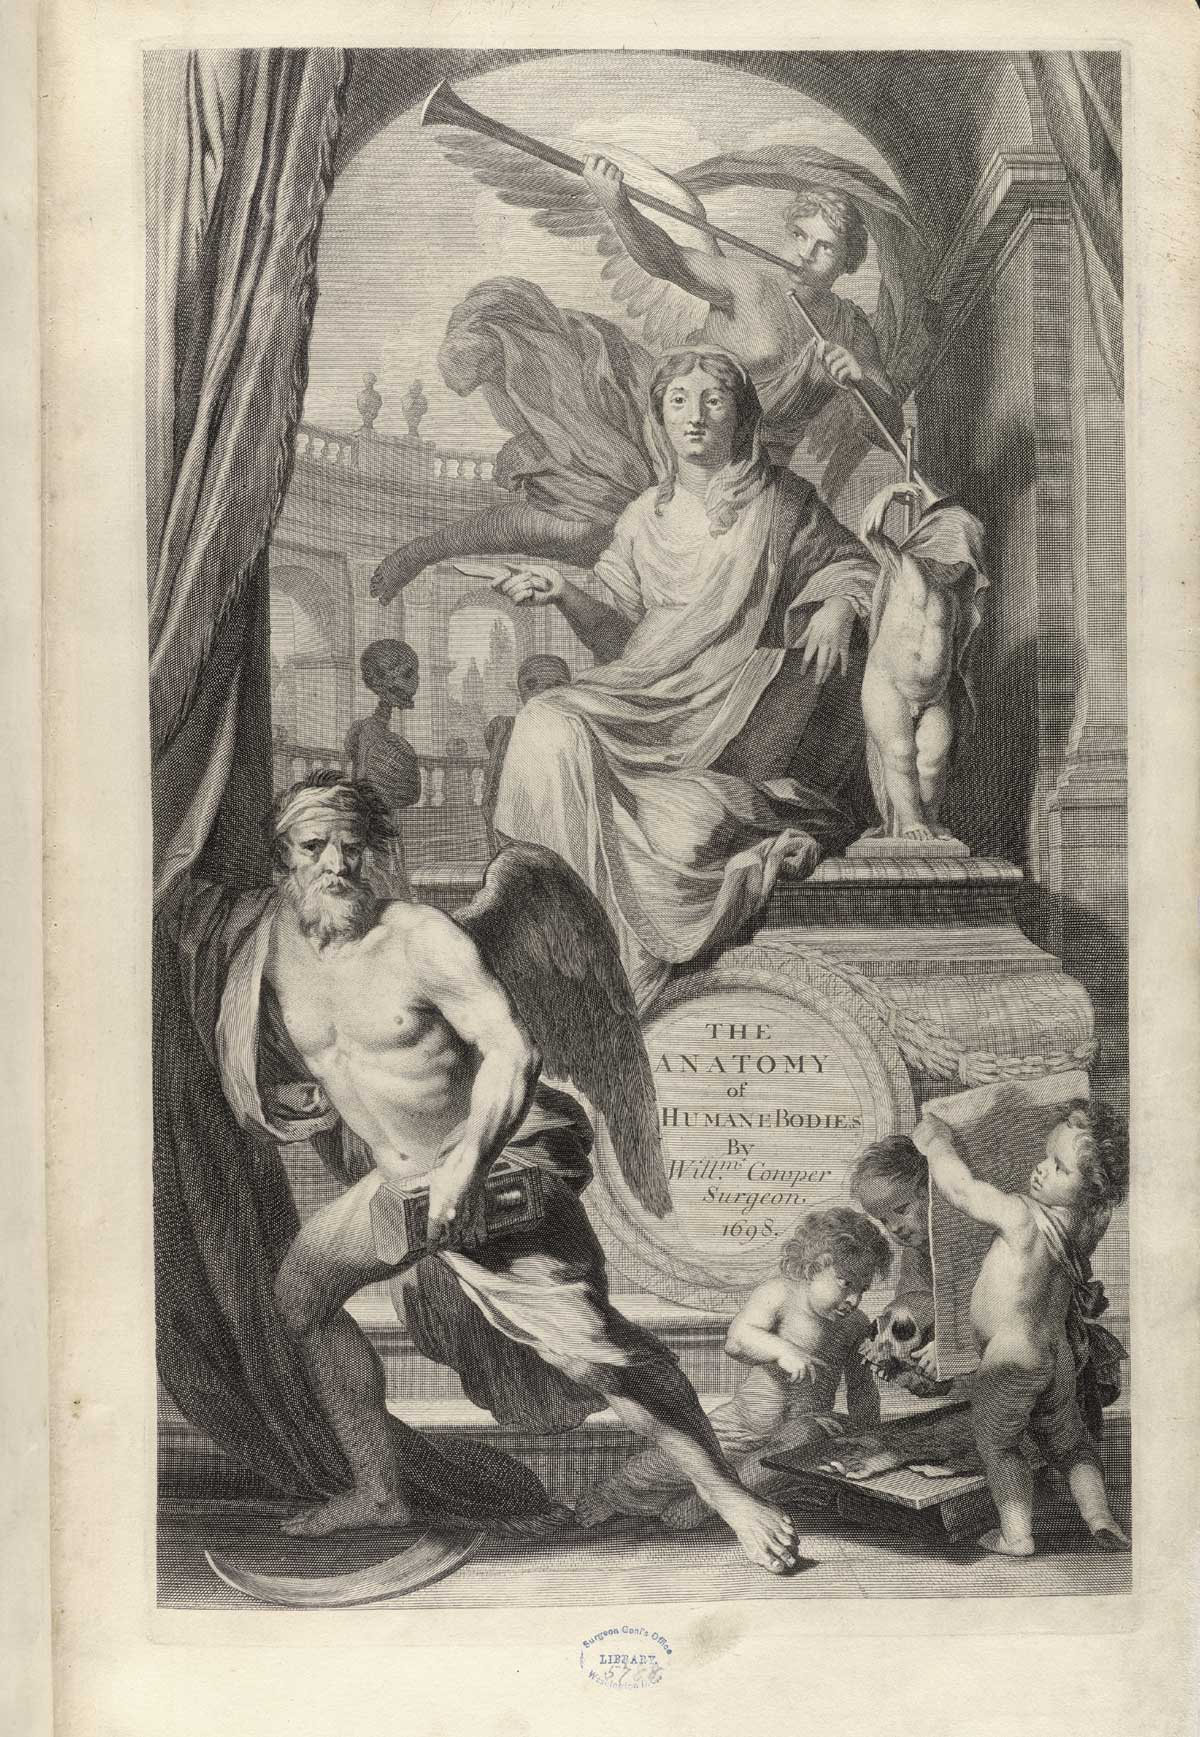 Engraved title page with allegorical scene featuring a goddess of wisdom seated on a throne with an angel above her blowing a horn, the throne engraved with the books title, and to the left underneath is an older bearded angel holding a scientific instrument in his left had, and in the bottom right corner are three babies looking at a skull and dissected arm; in the background is a Greek temple and two skeletons conversing.